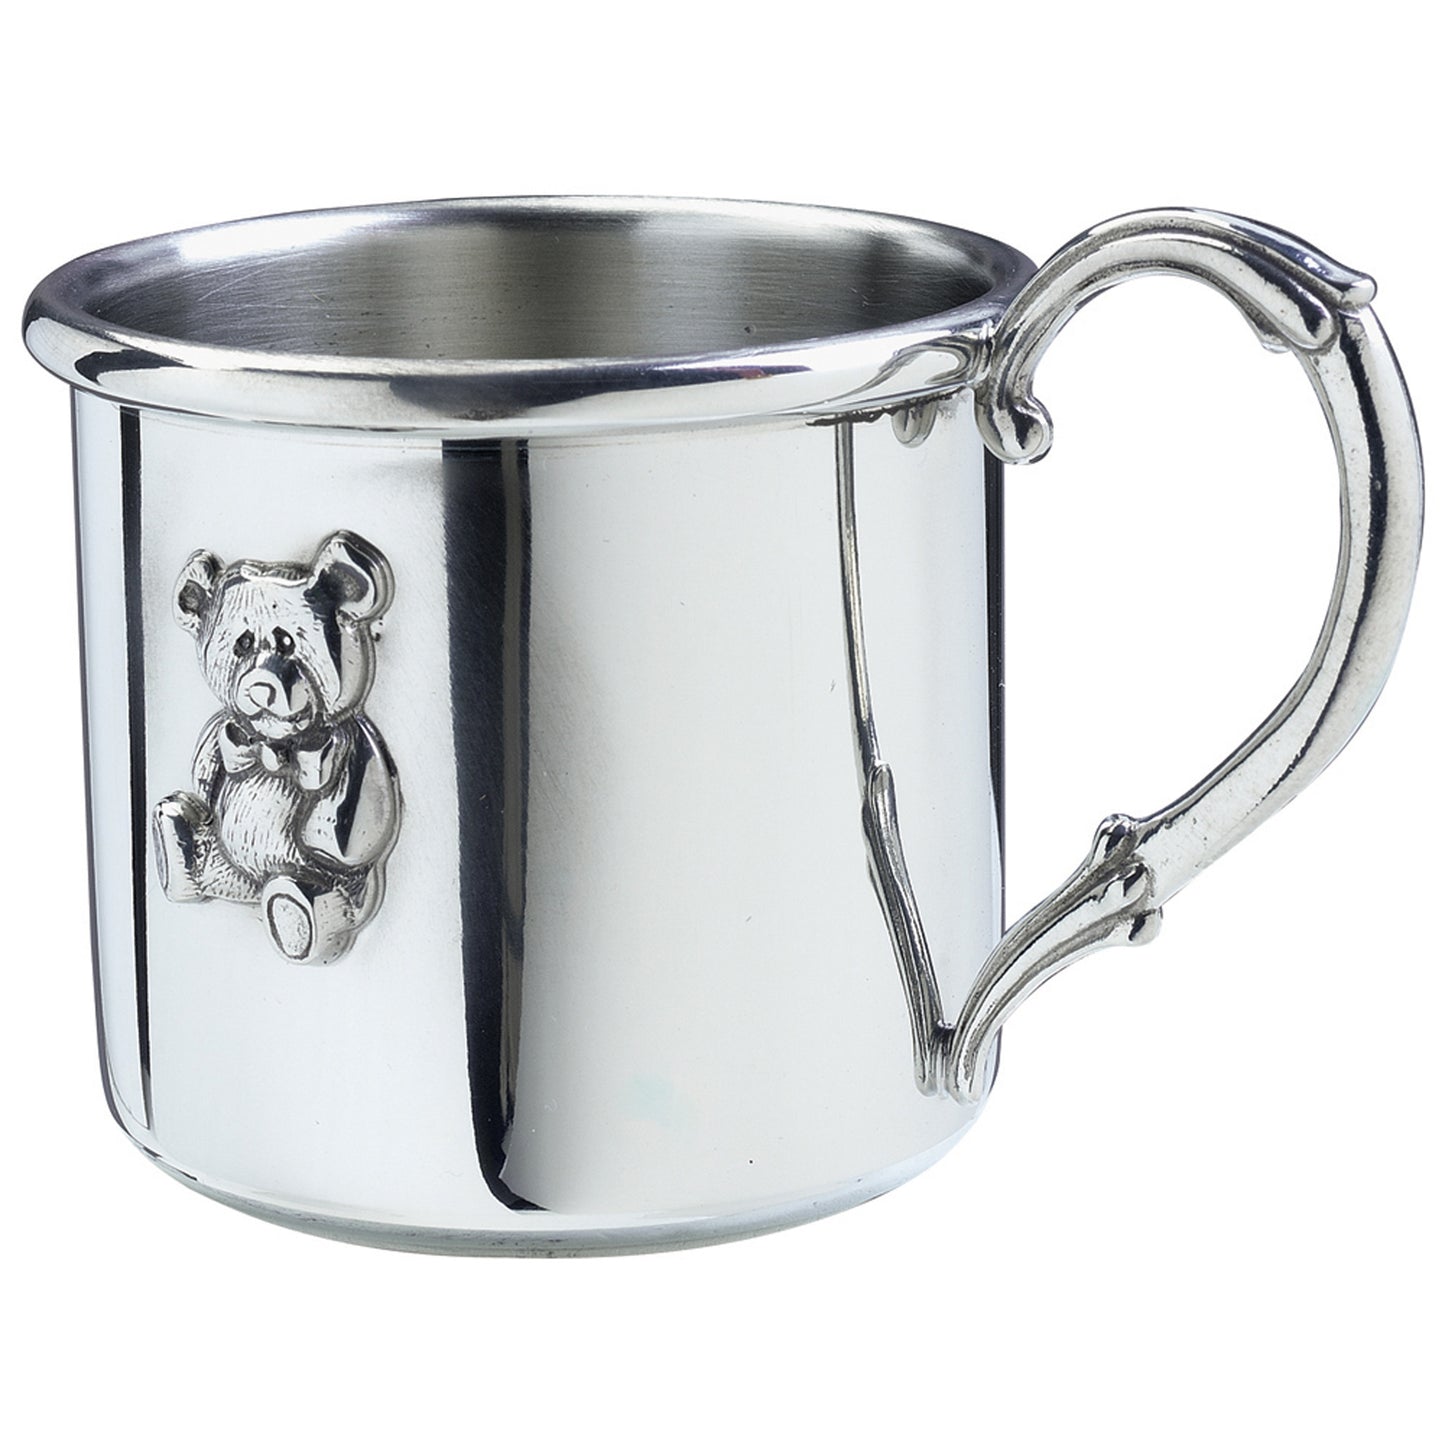 https://www.templetonsilver.com/cdn/shop/products/Silver-Baby-Cup-with-Teddy-Bear-Templeton-Silver.jpg?v=1603299381&width=1445